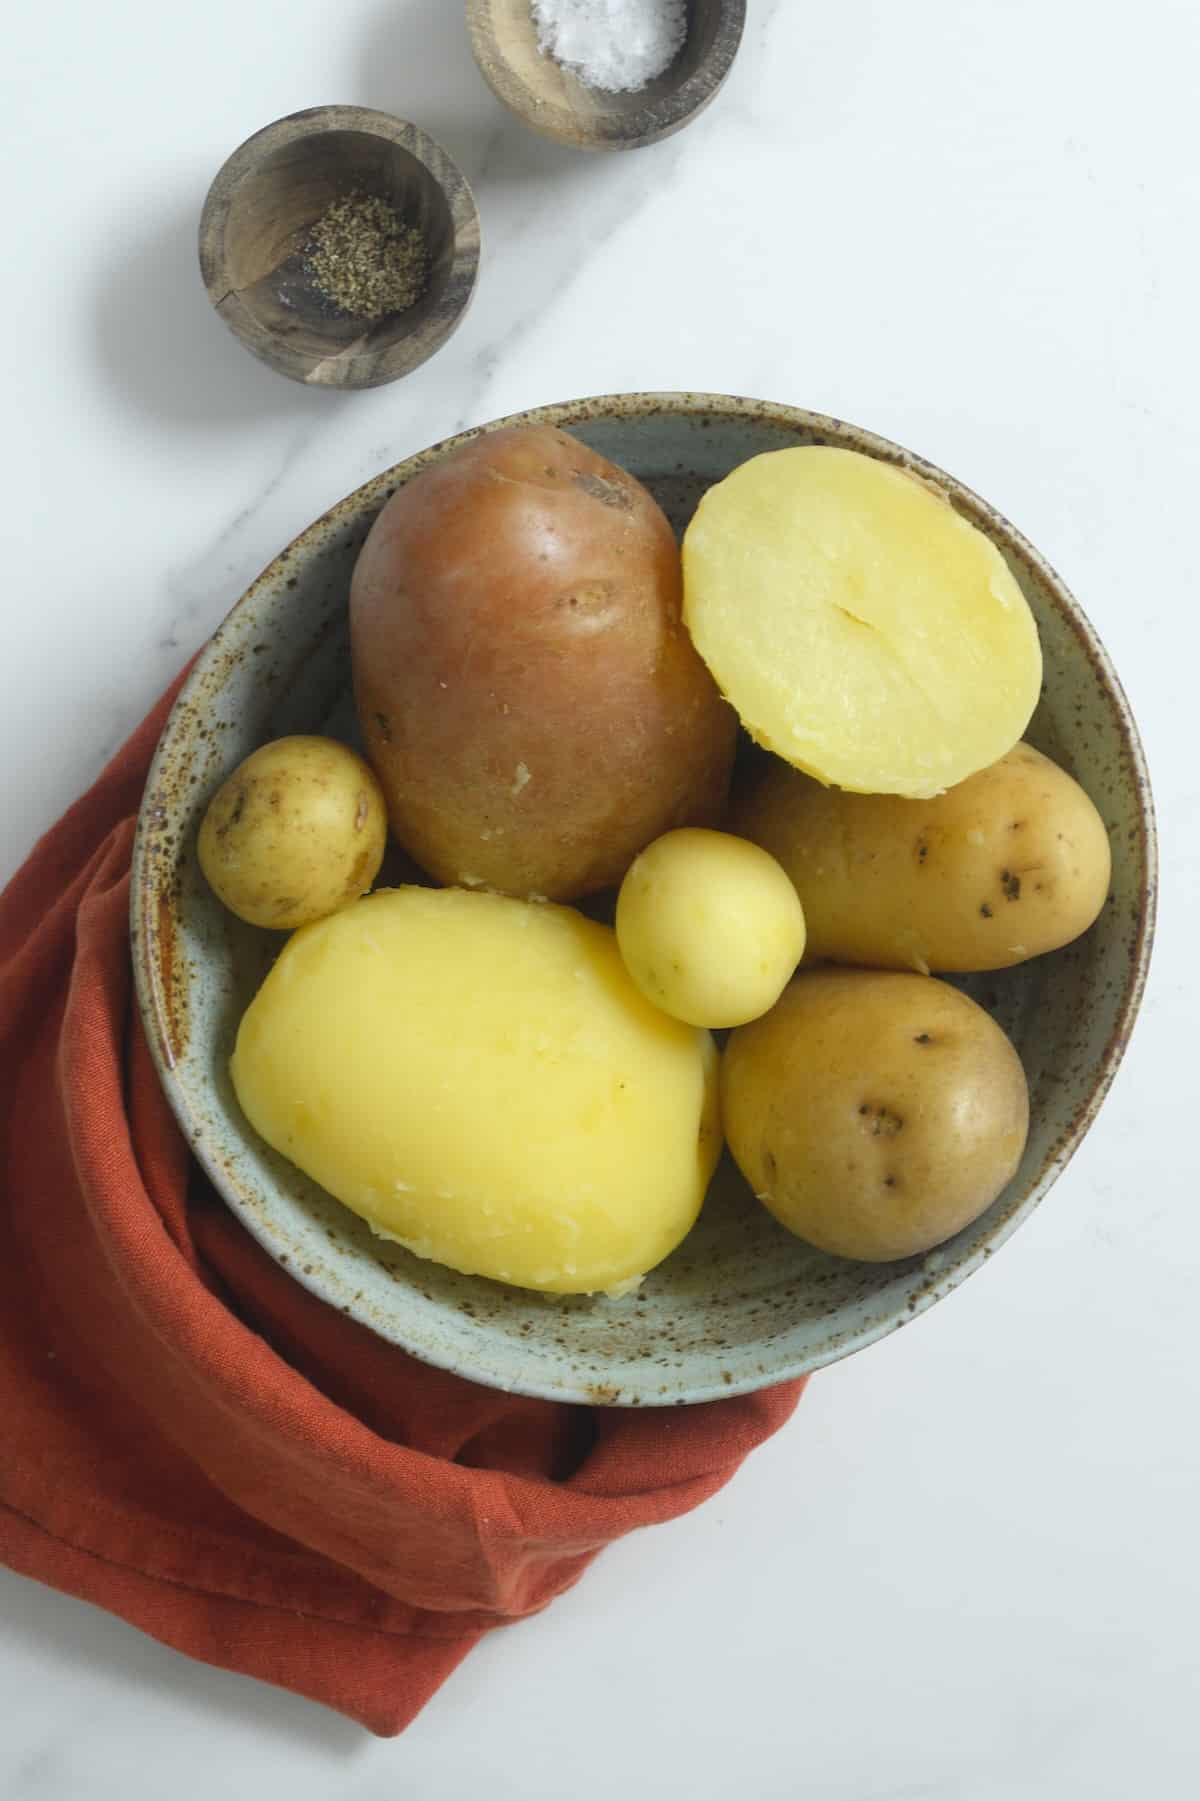 Boiled whole and halved potatoes